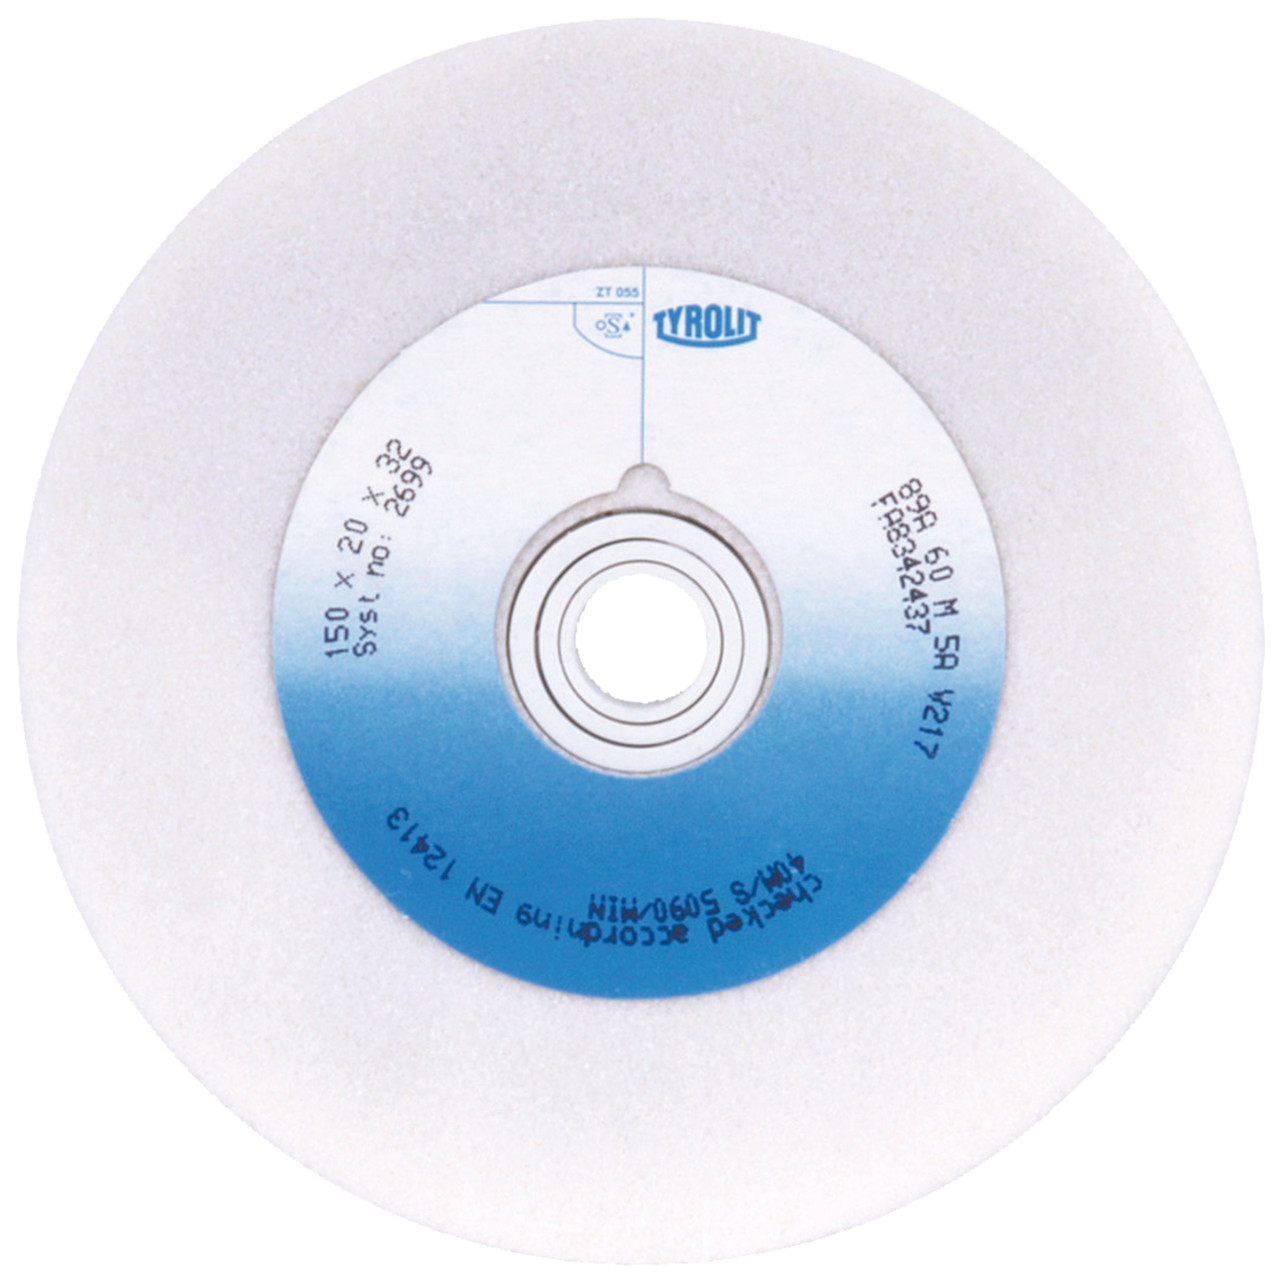 Tyrolit Conventional ceramic grinding discs DxDxH 175x25x32 For high-alloy steels and HSS, shape: 1, Art. 2973